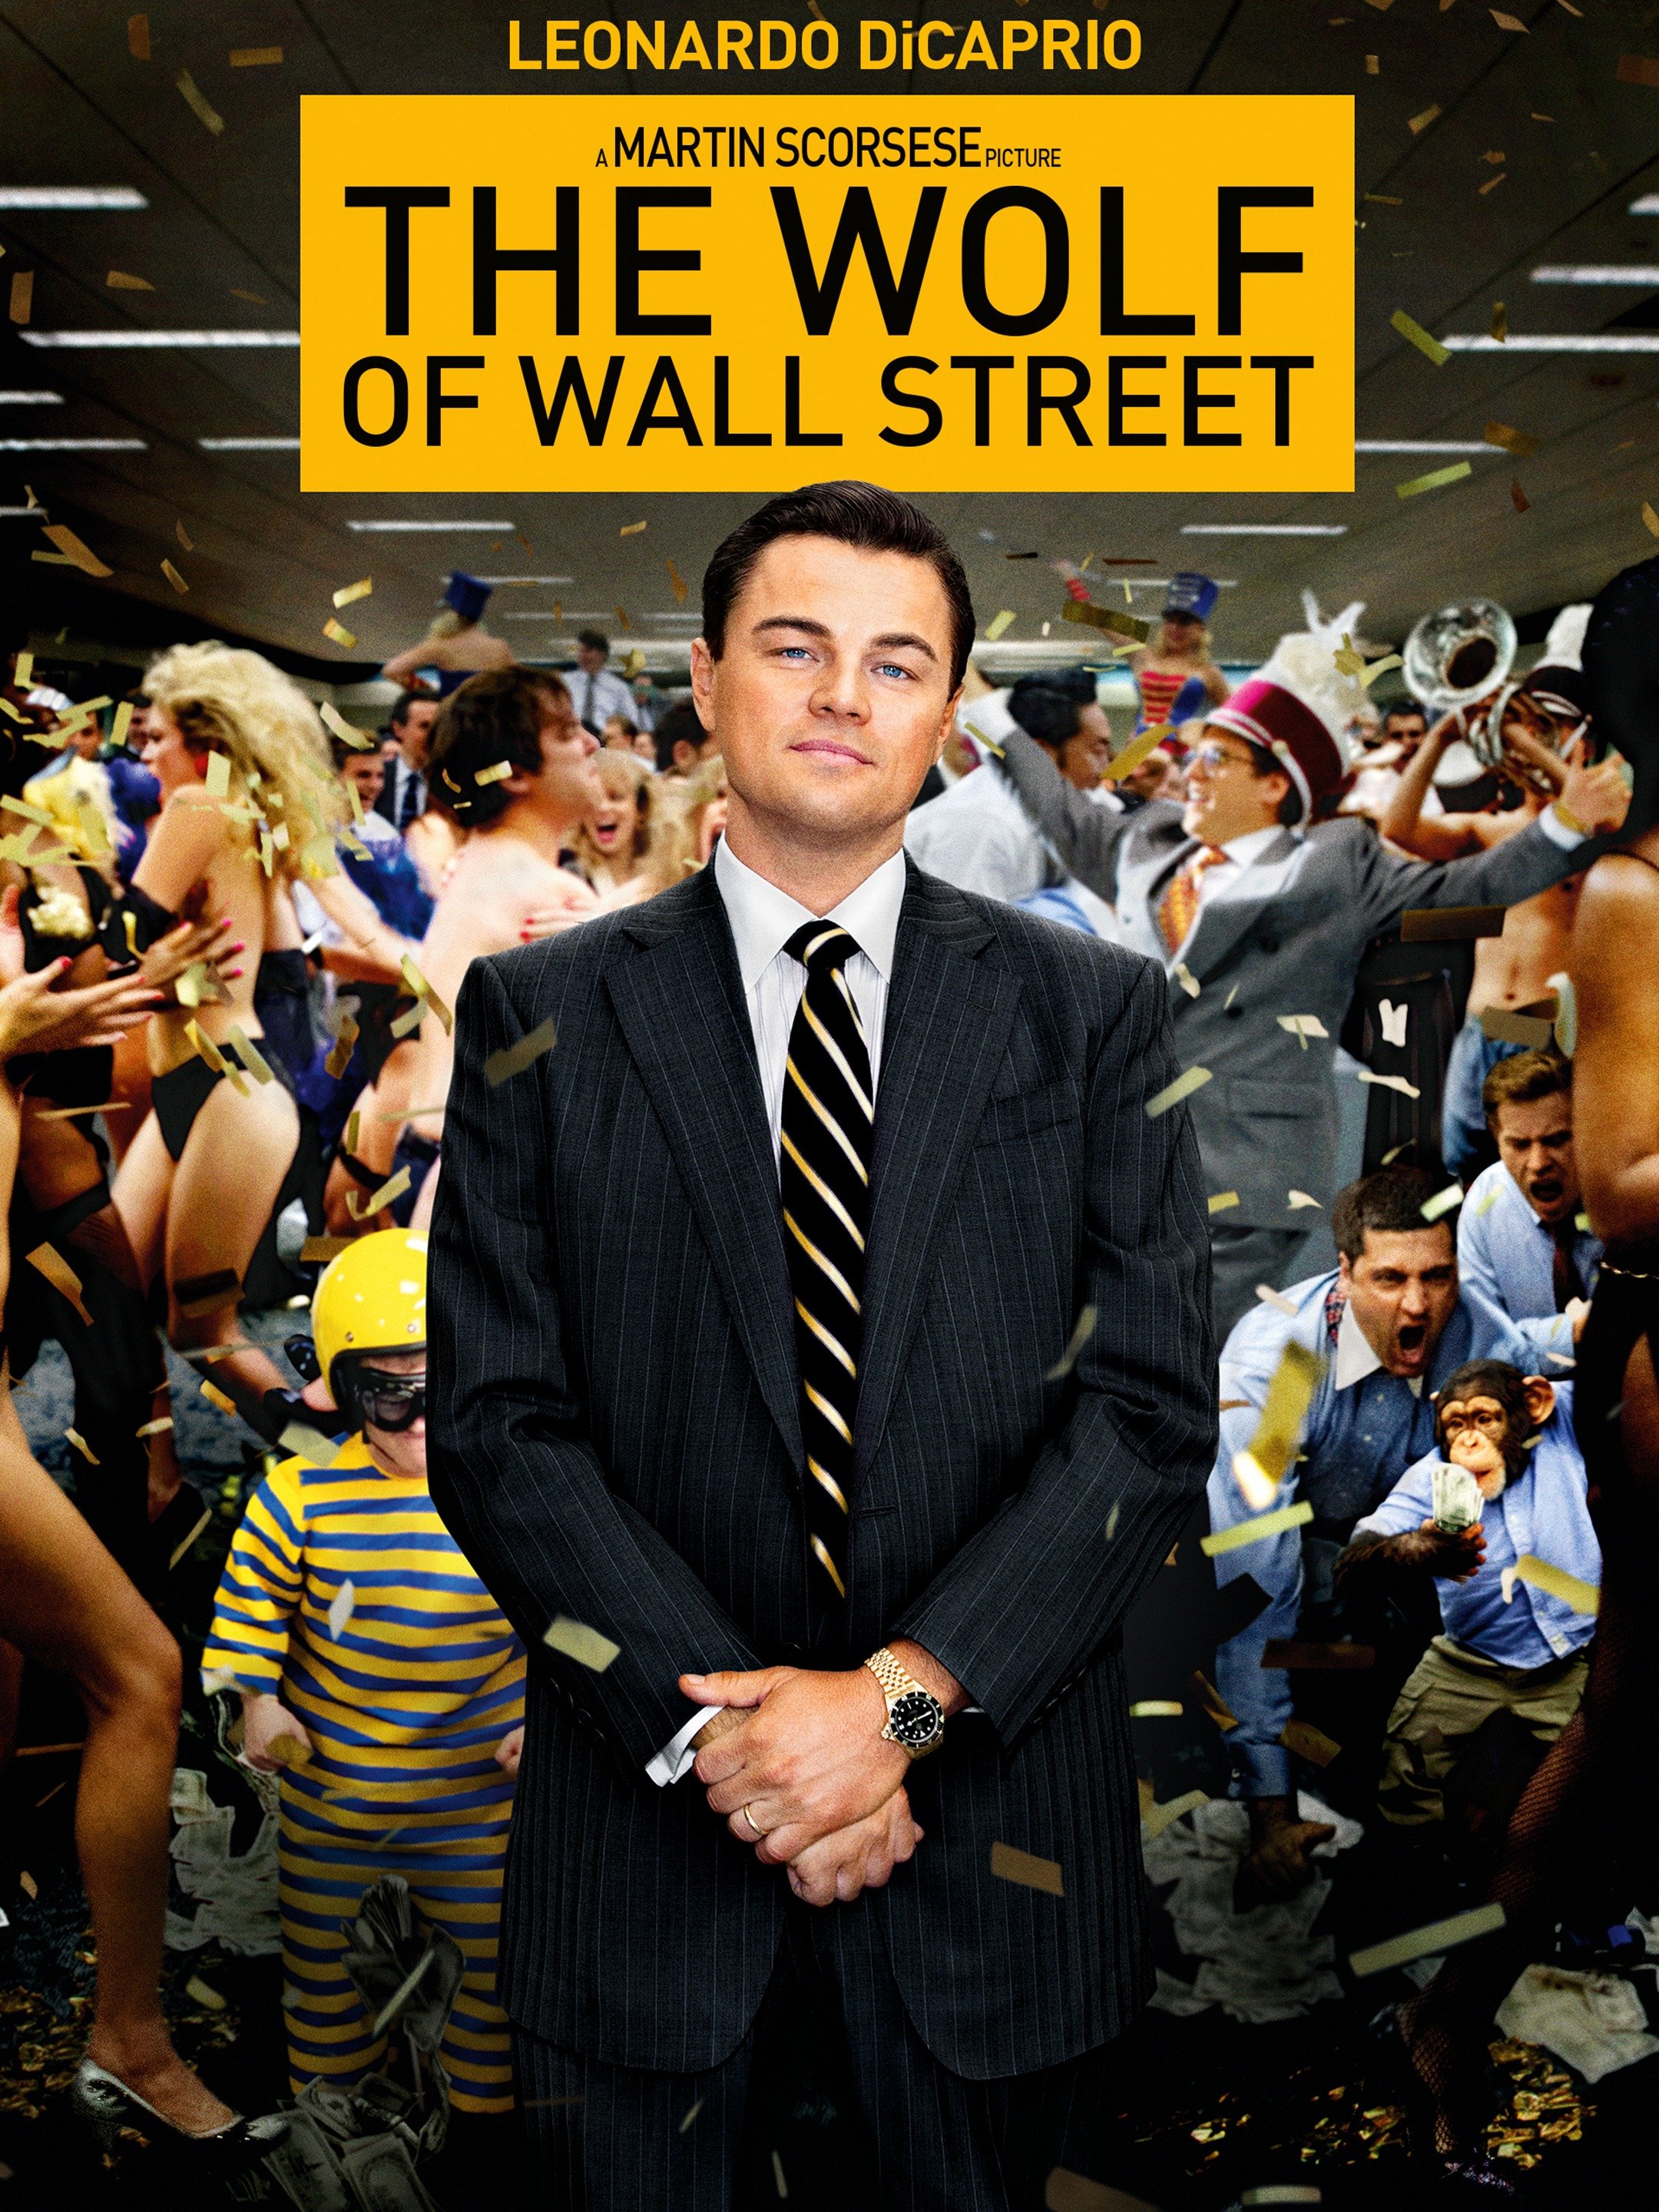 The Wolf of Wall Street (2013) - Rotten Tomatoes